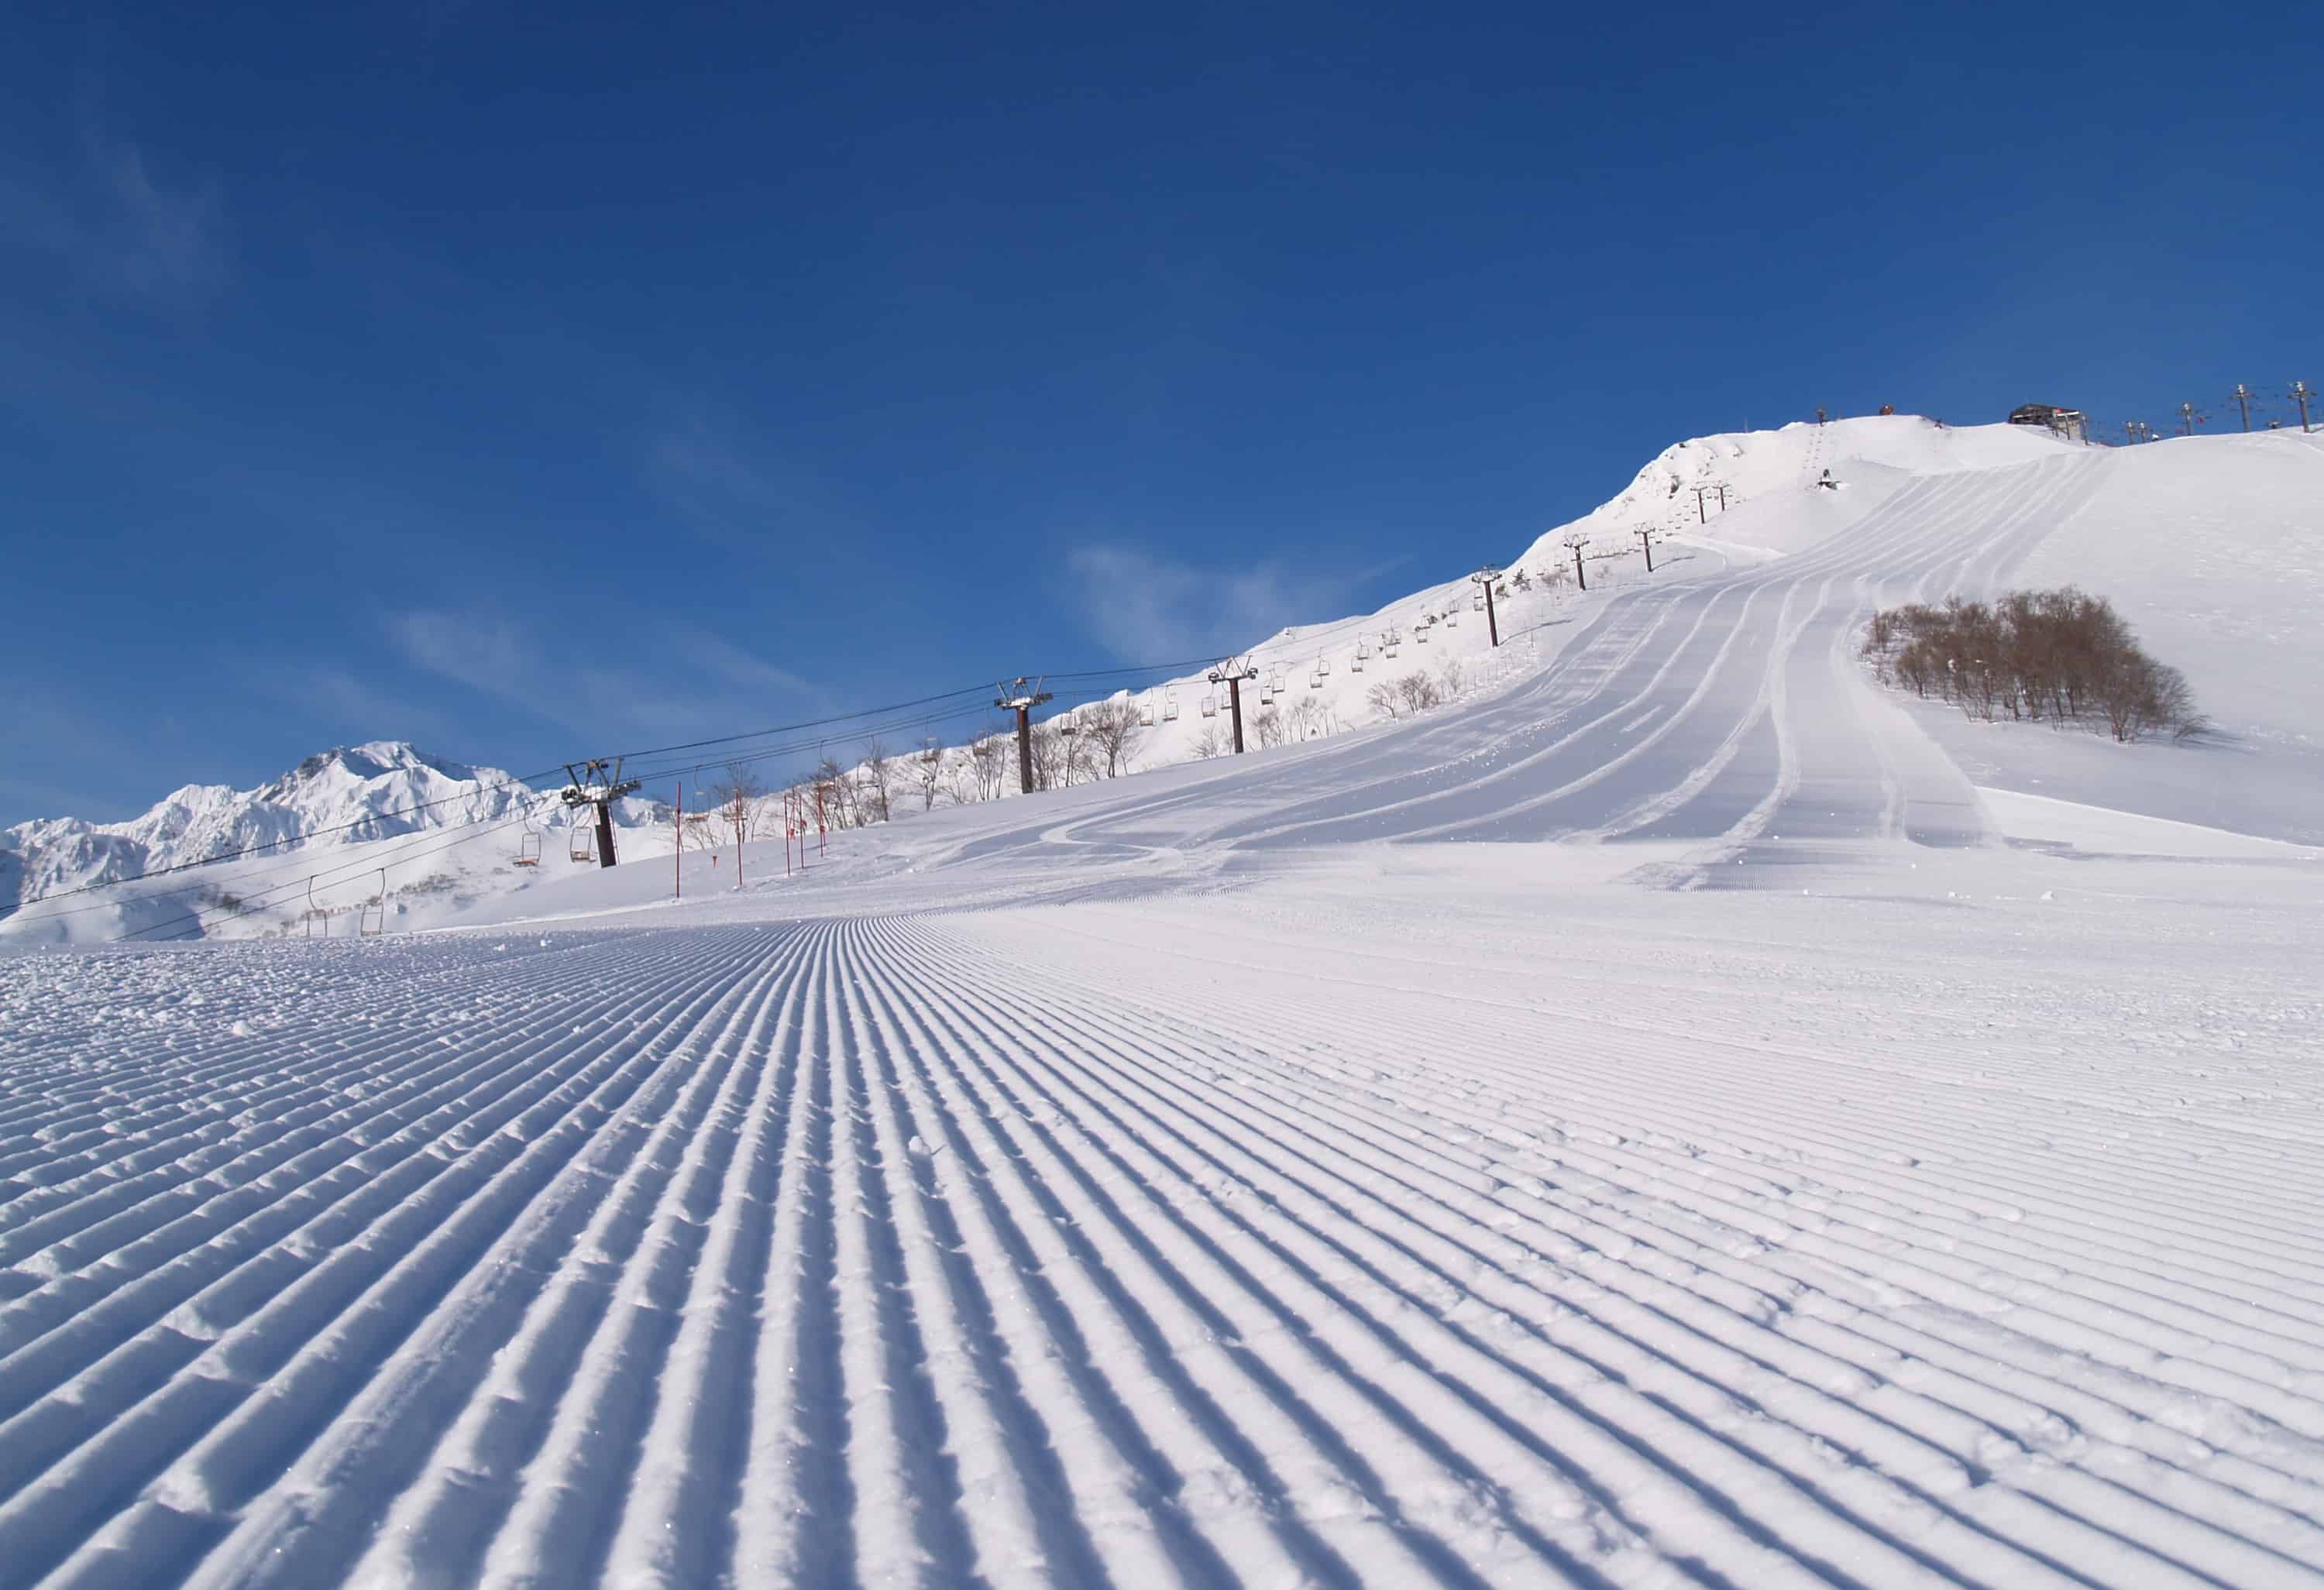 Perfect groomers on a perfect day at Happo-One. 